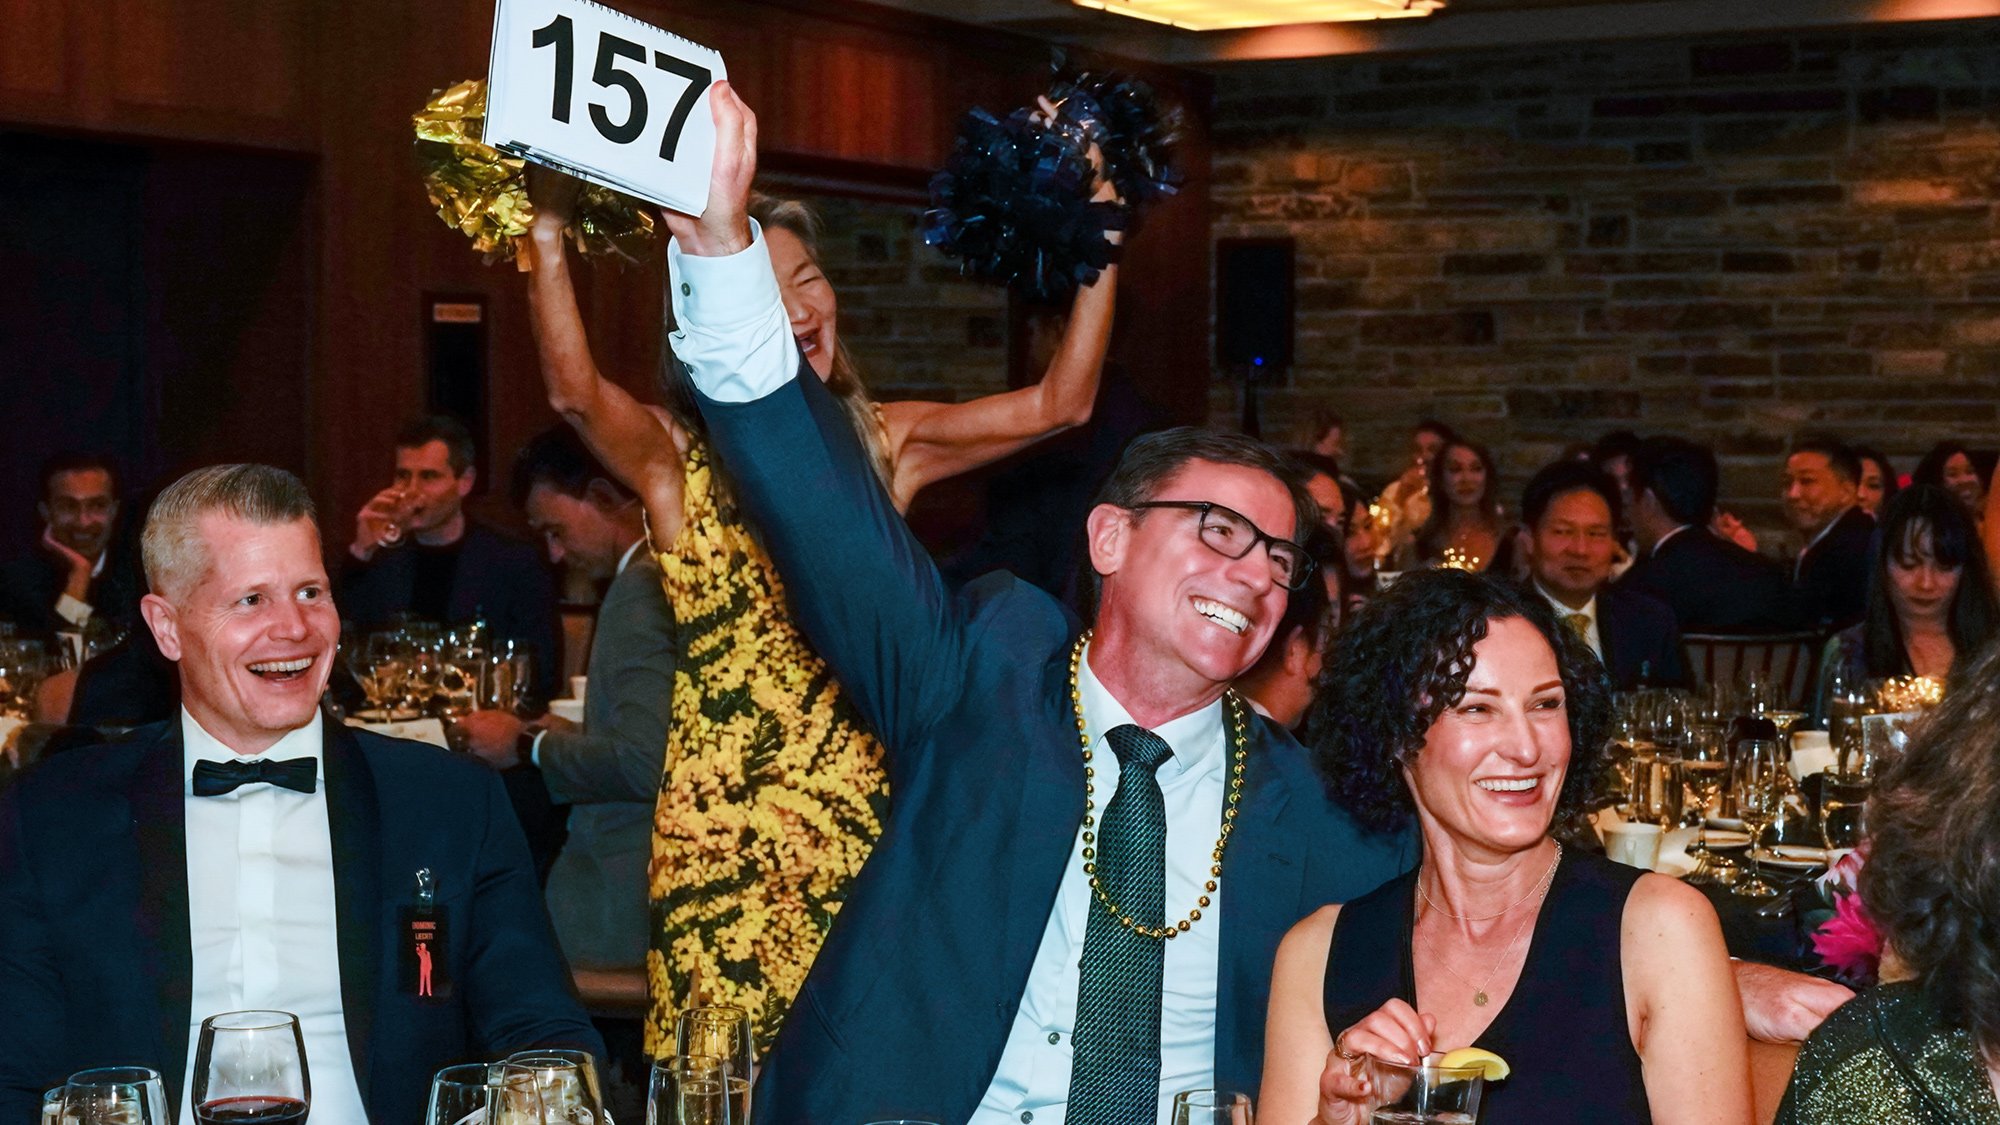 Community Channels James Bond at INTL Annual Gala & Auction